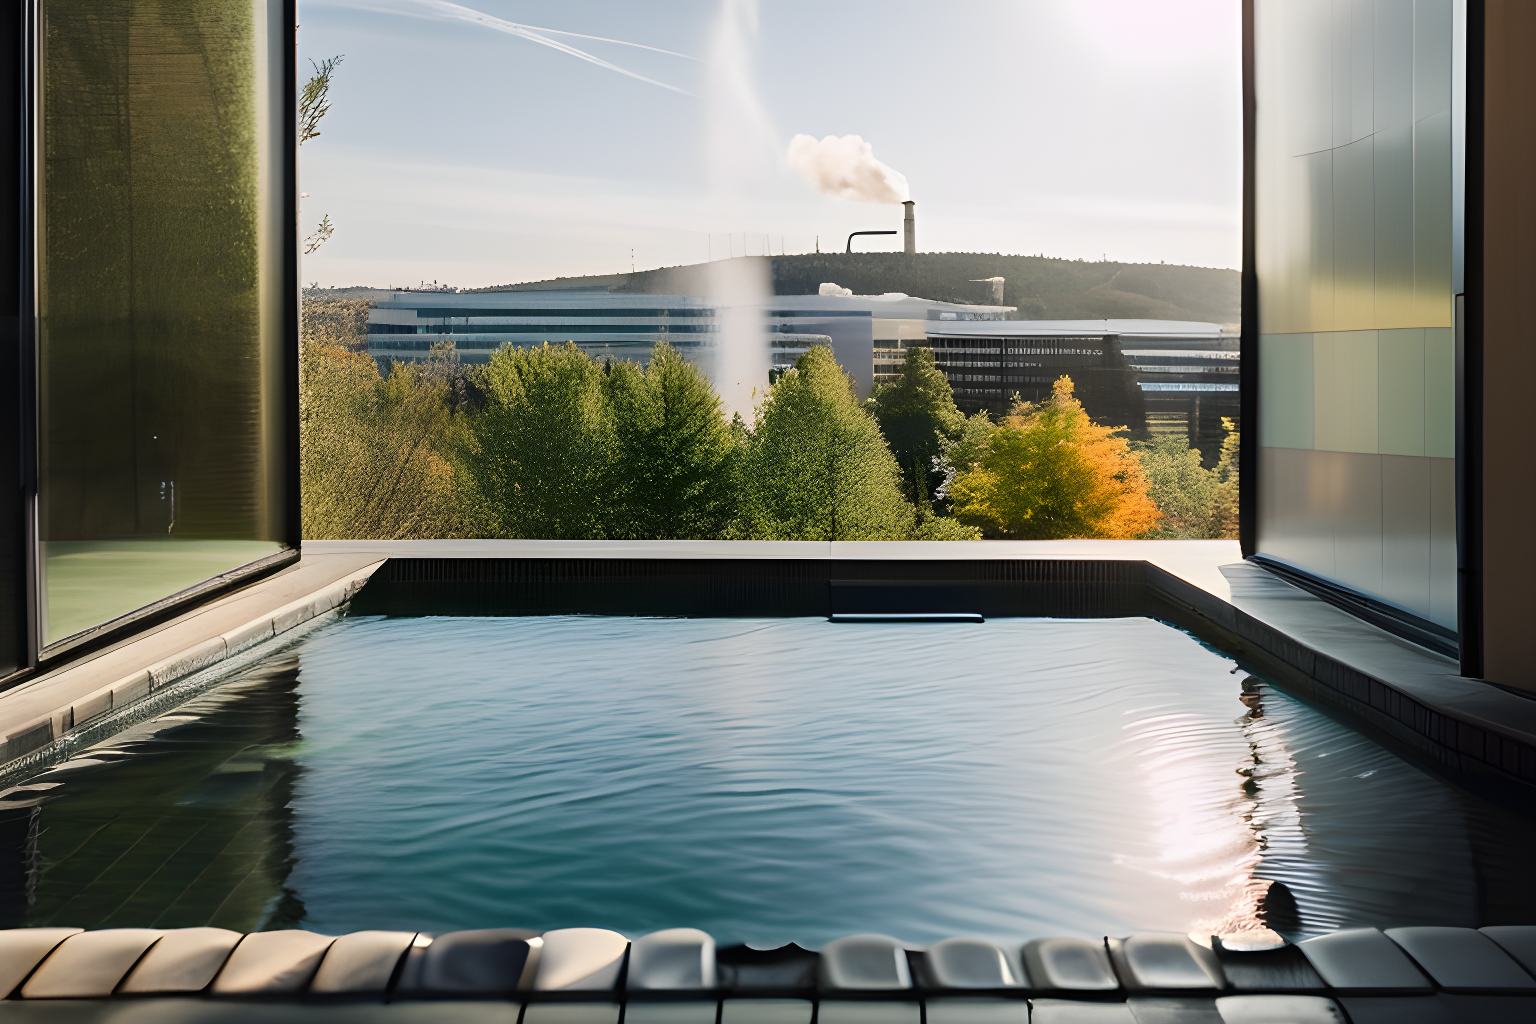 A bath filled with boiling water, the facebook hq in the background